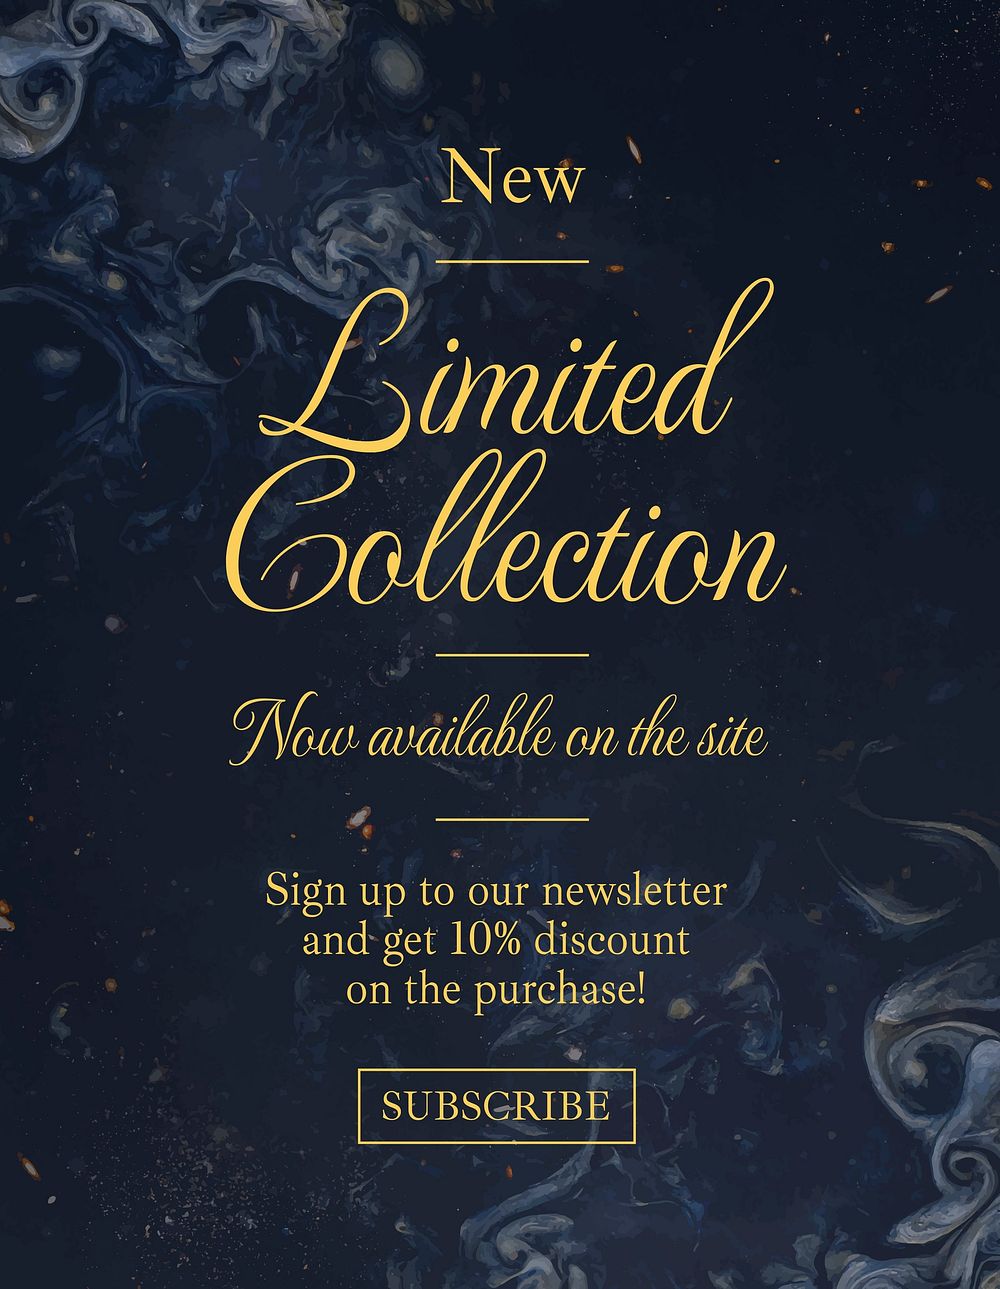 Limited collection flyer template, dark elegant, editable text vector